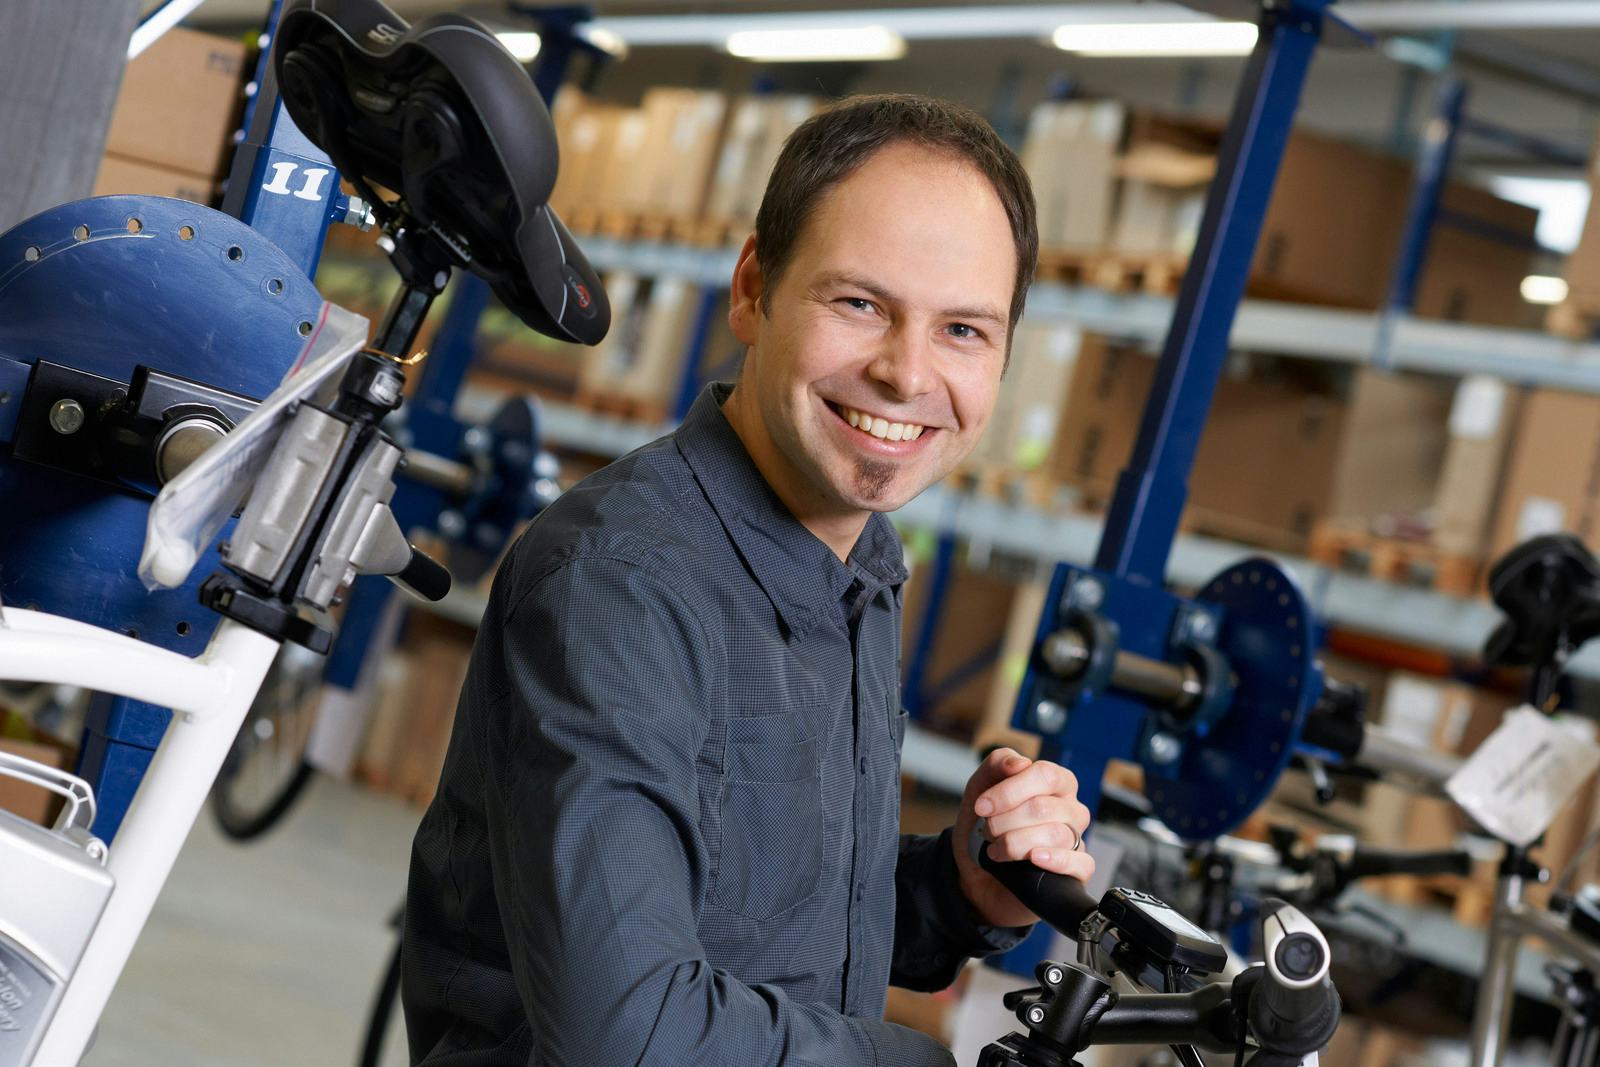 Biketec AG’s international sales manager is heading the new subsidiary Flyer Service GmbH based in Germany.